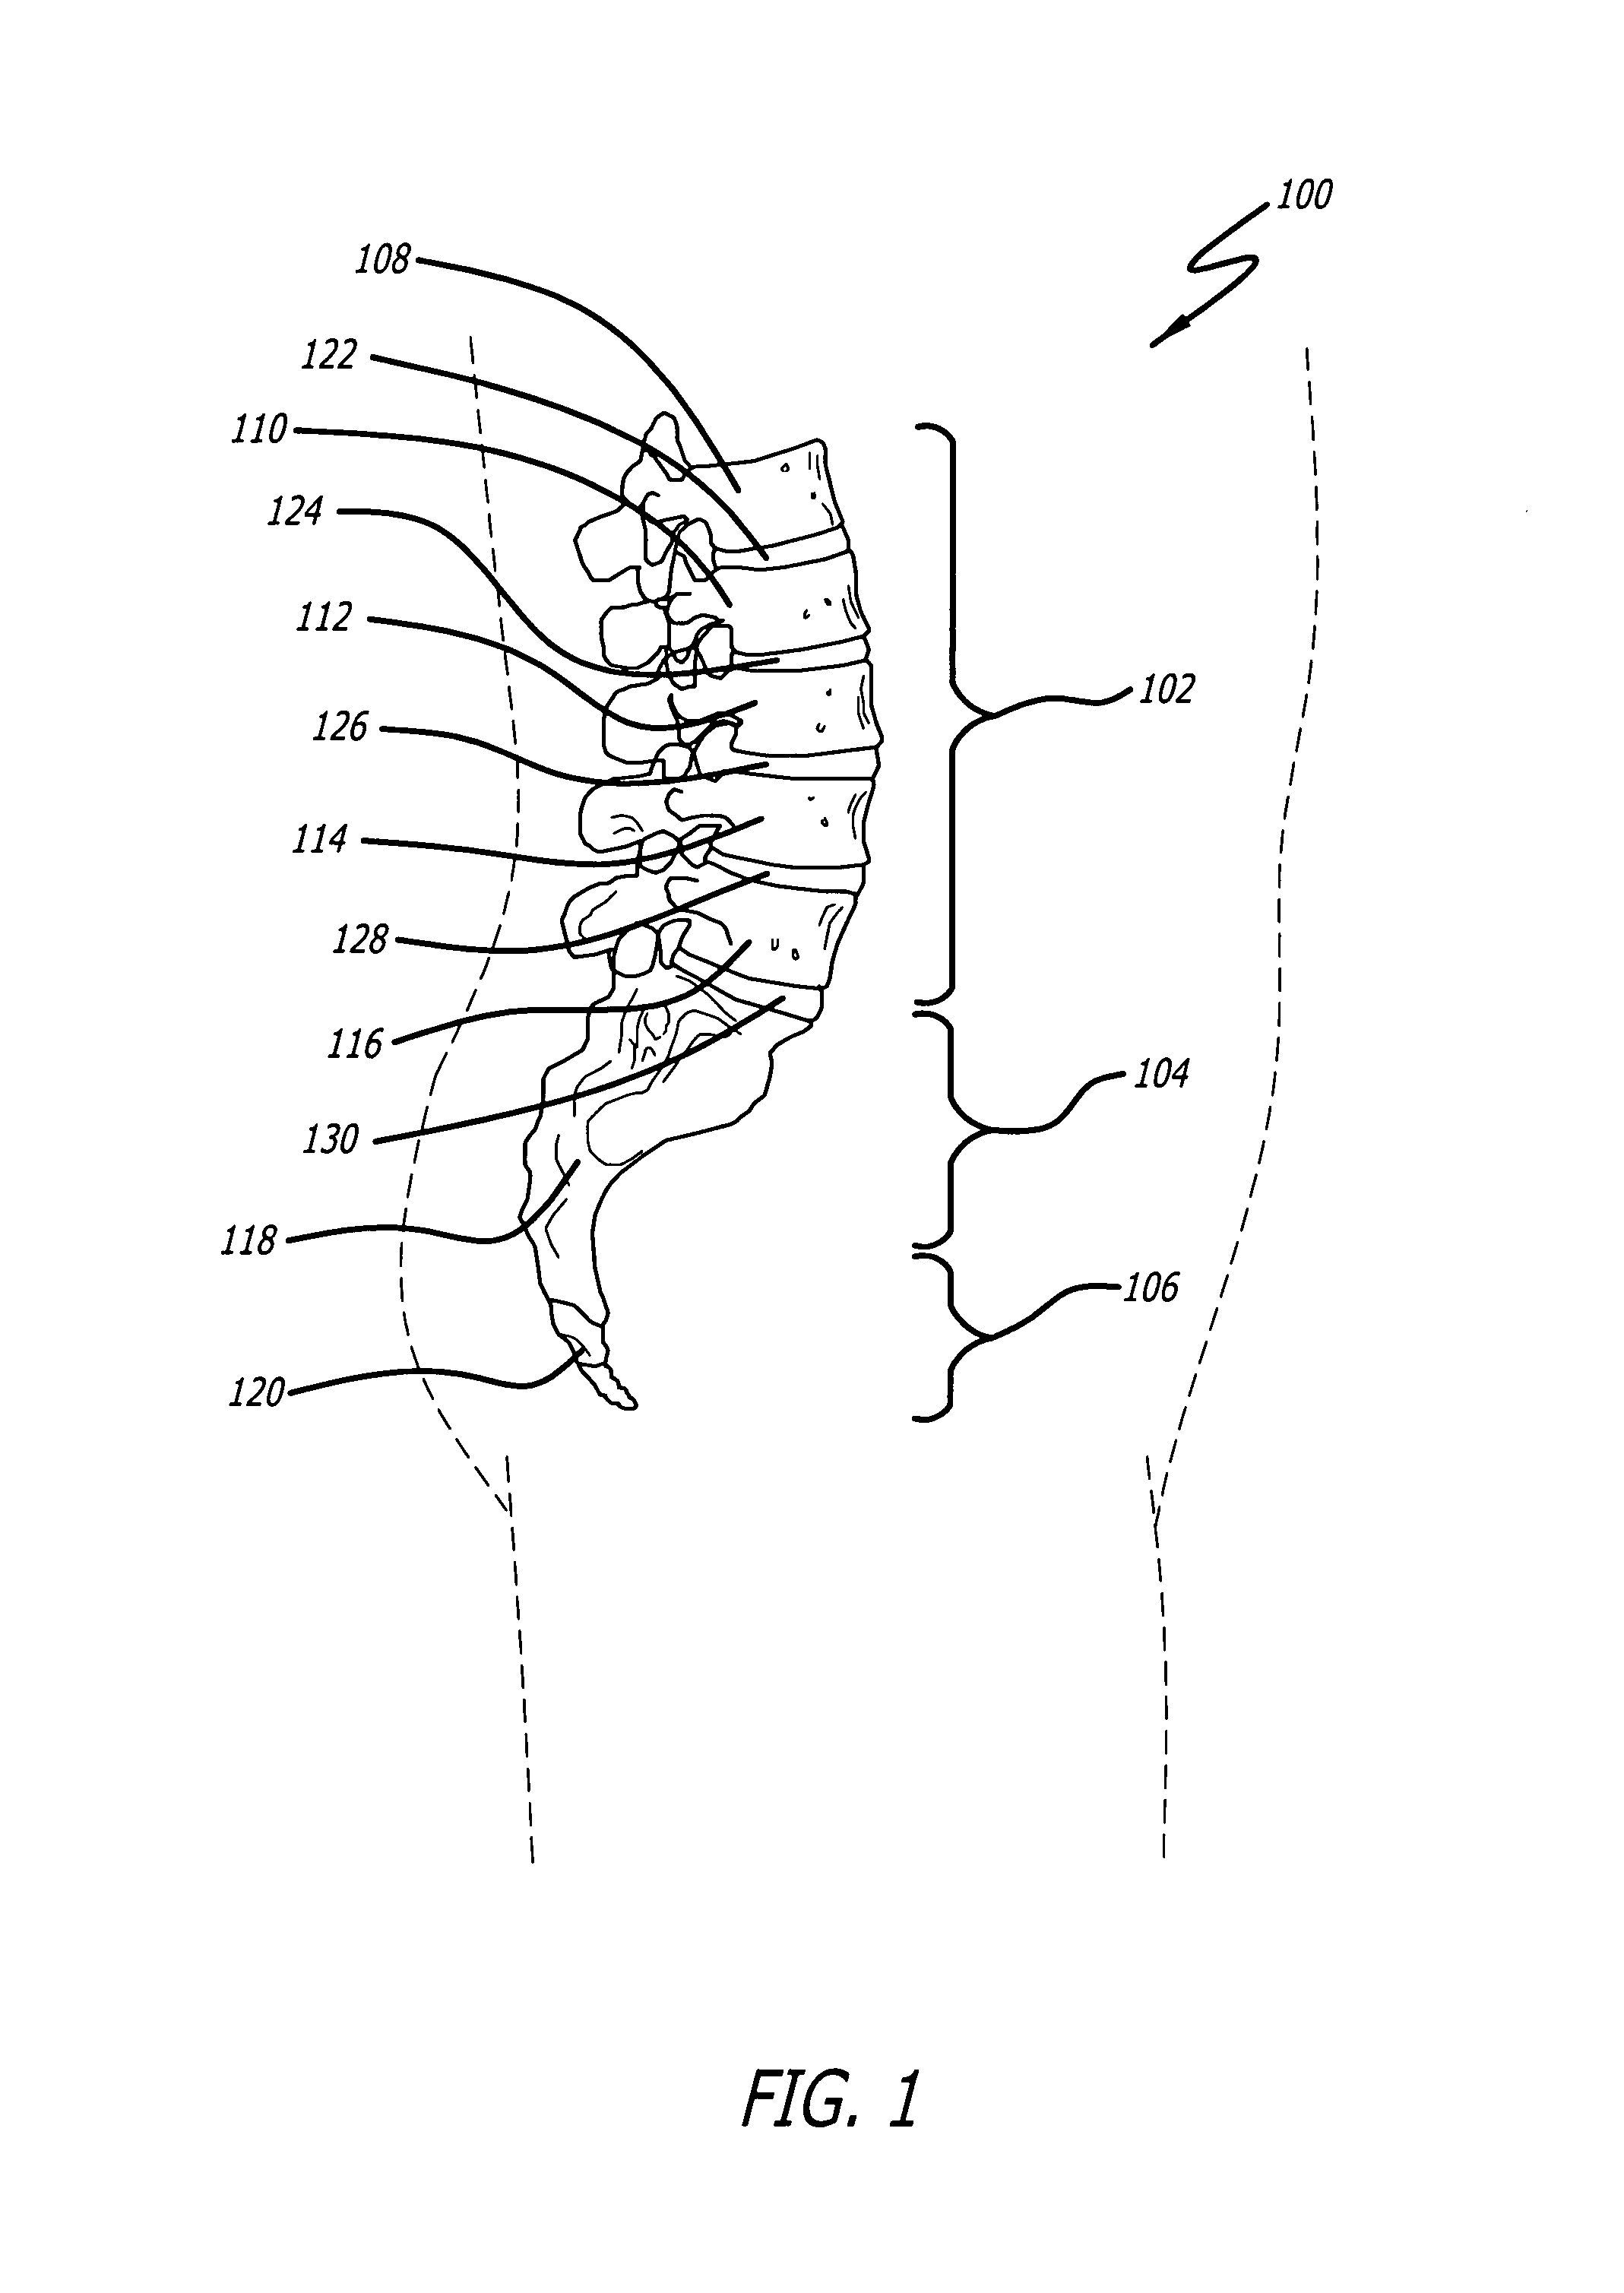 Method of deformity correction in a spine using injectable materials